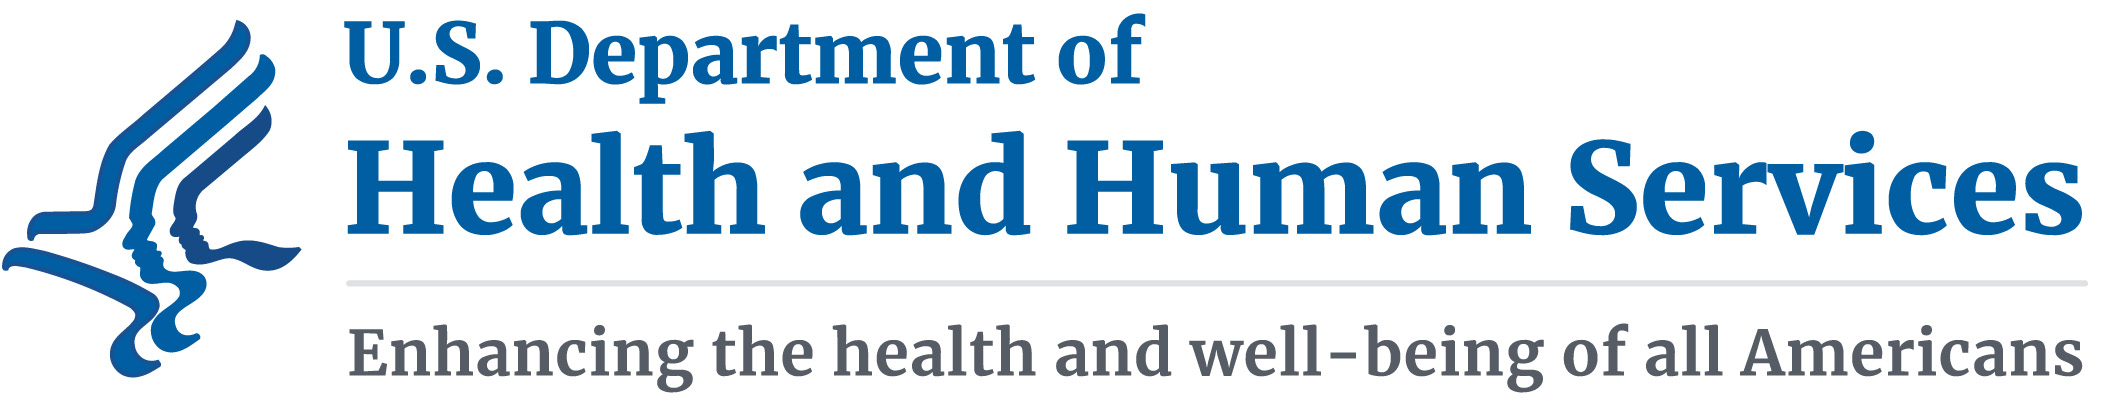 US Dept Health and Human Services Site Logo